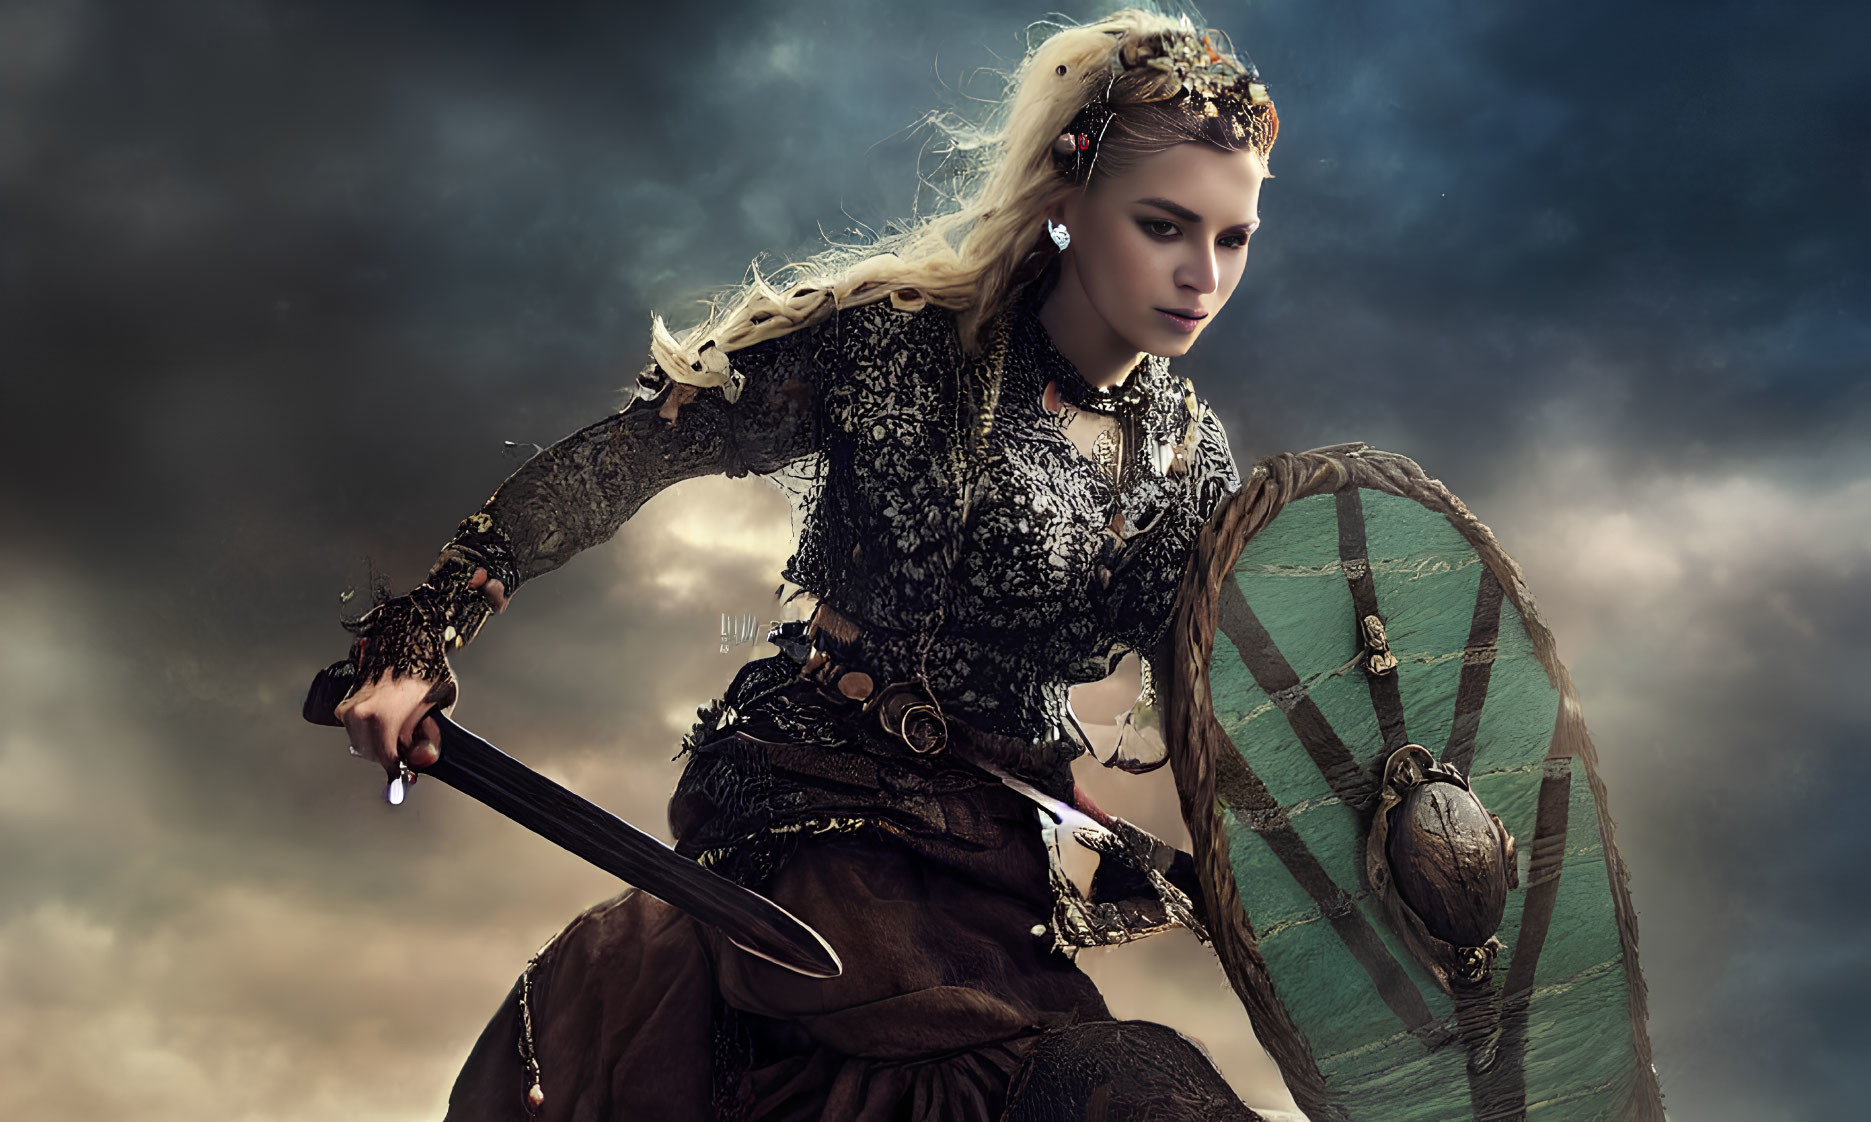 Medieval warrior woman in ornate attire with sword and shield against dramatic sky